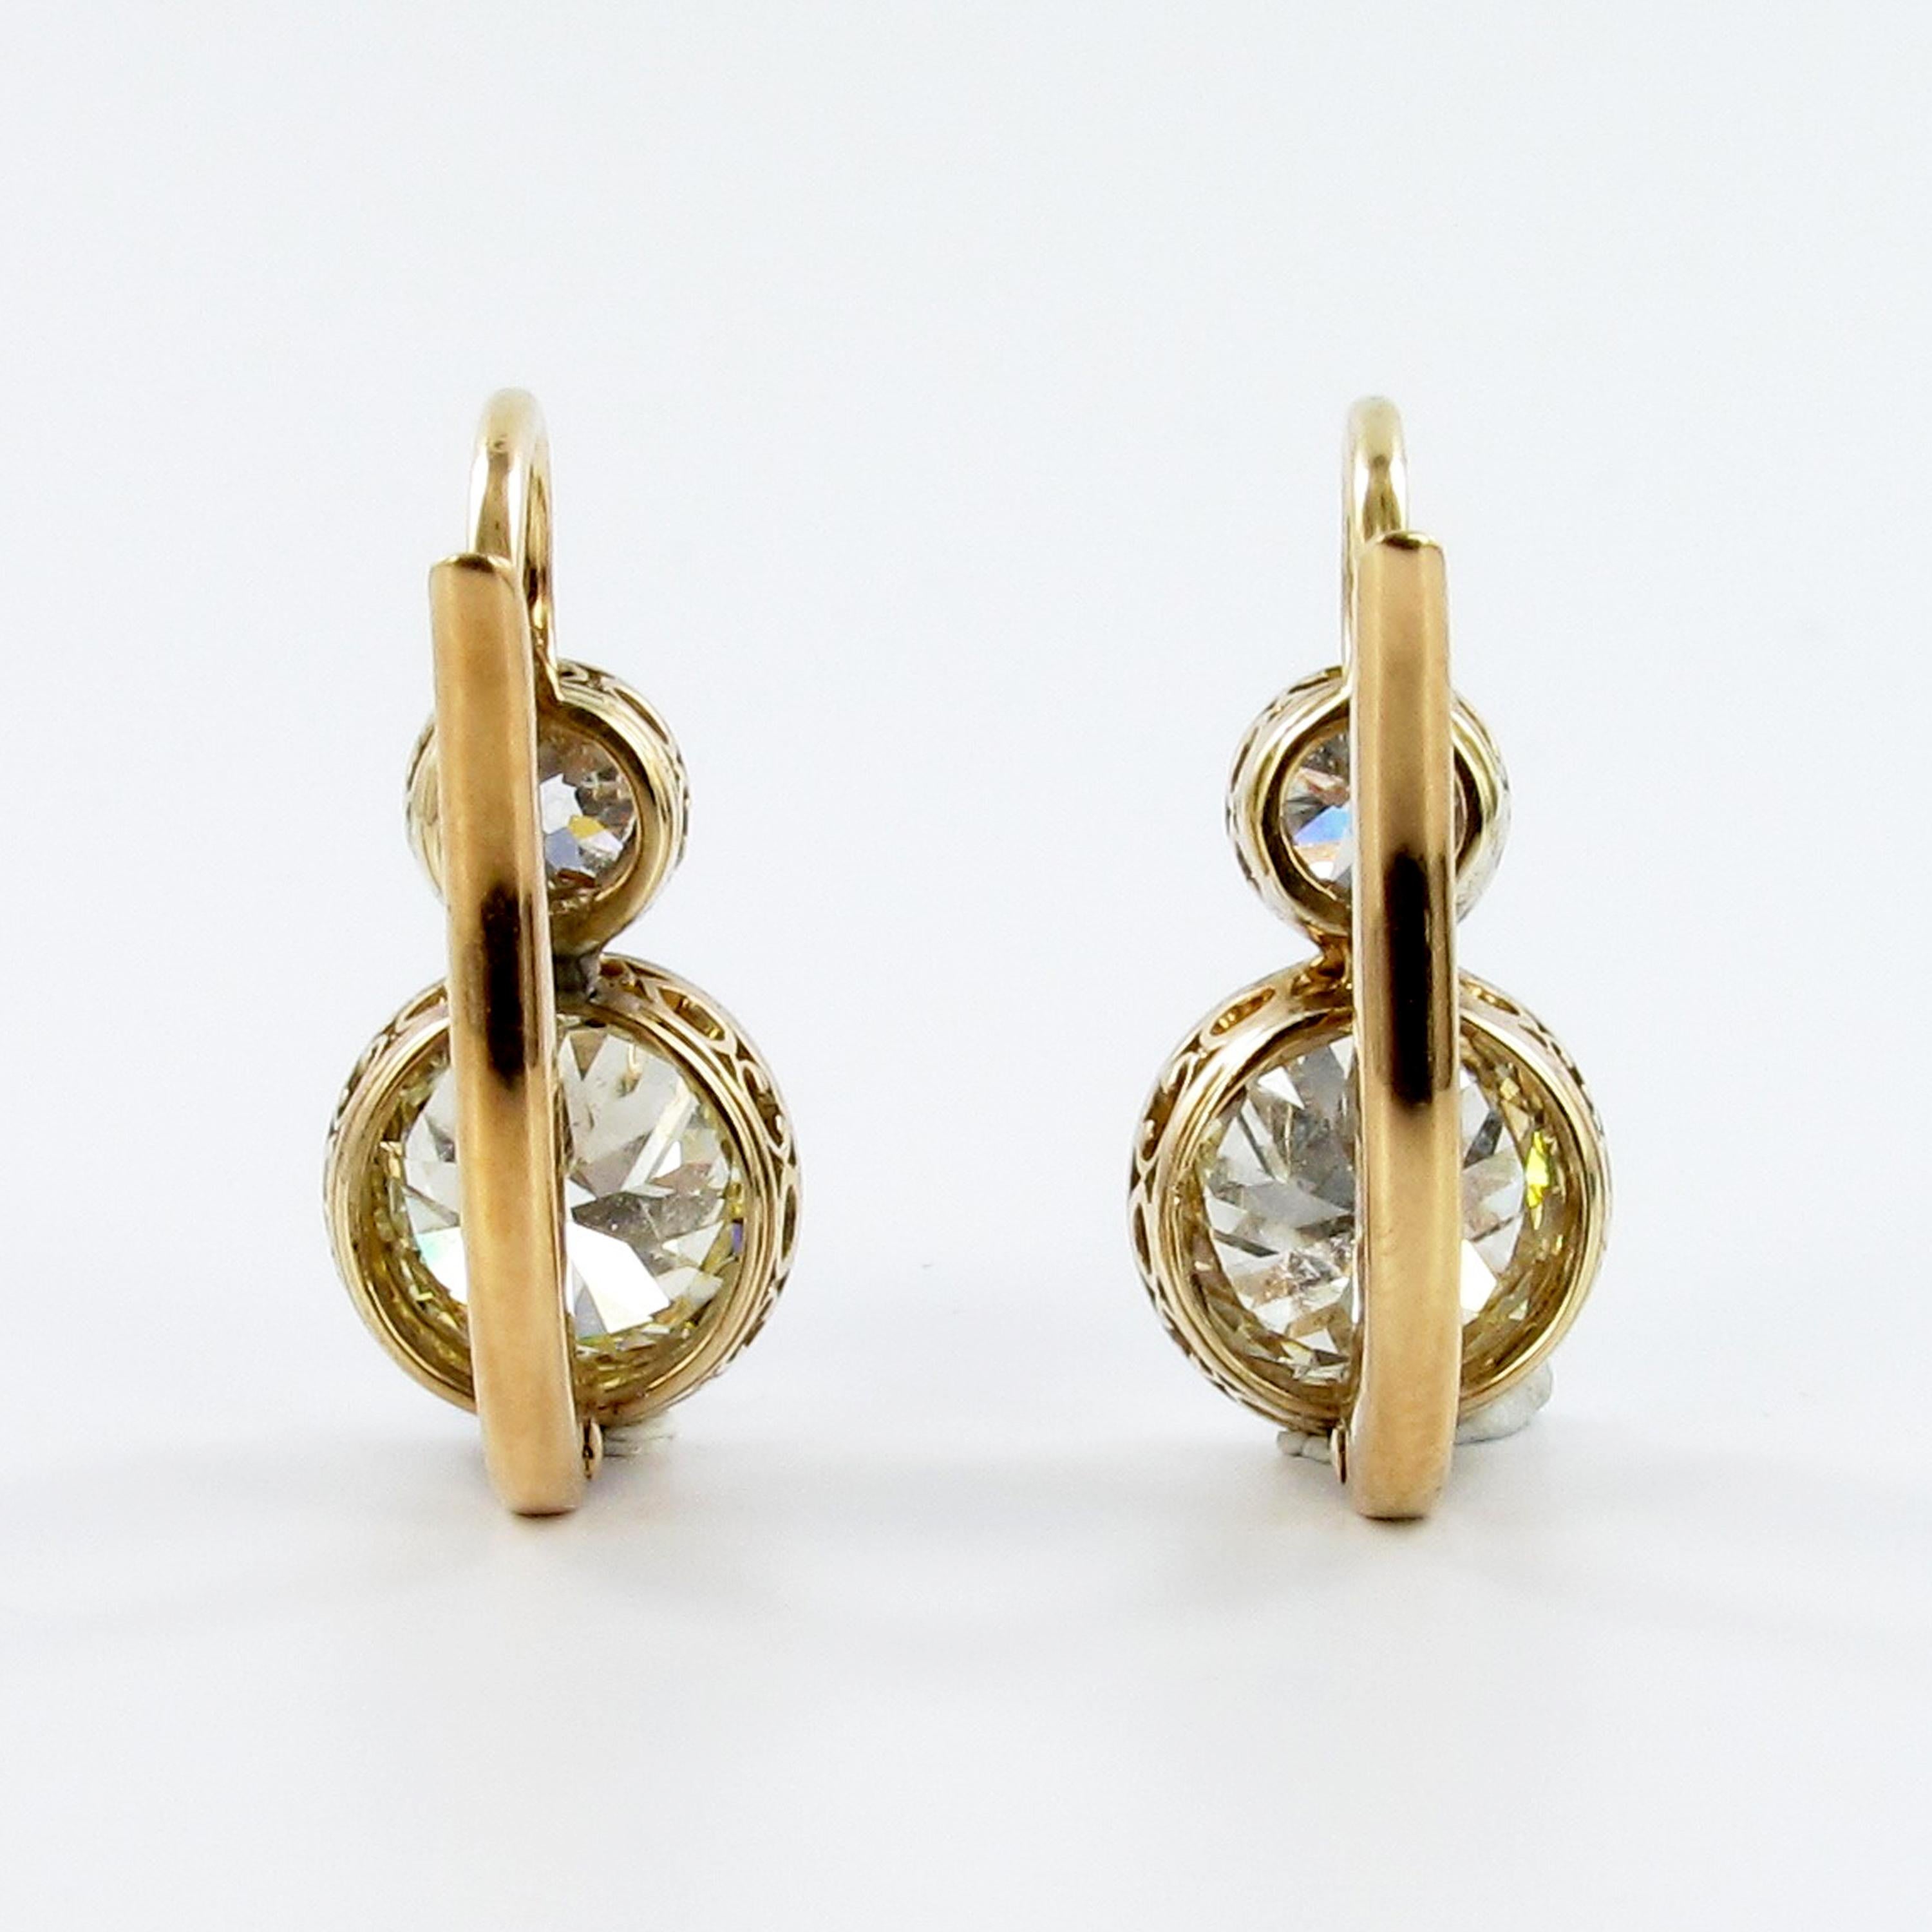 Women's or Men's Antique Pair of Diamond Earclips in Silver on Redgold